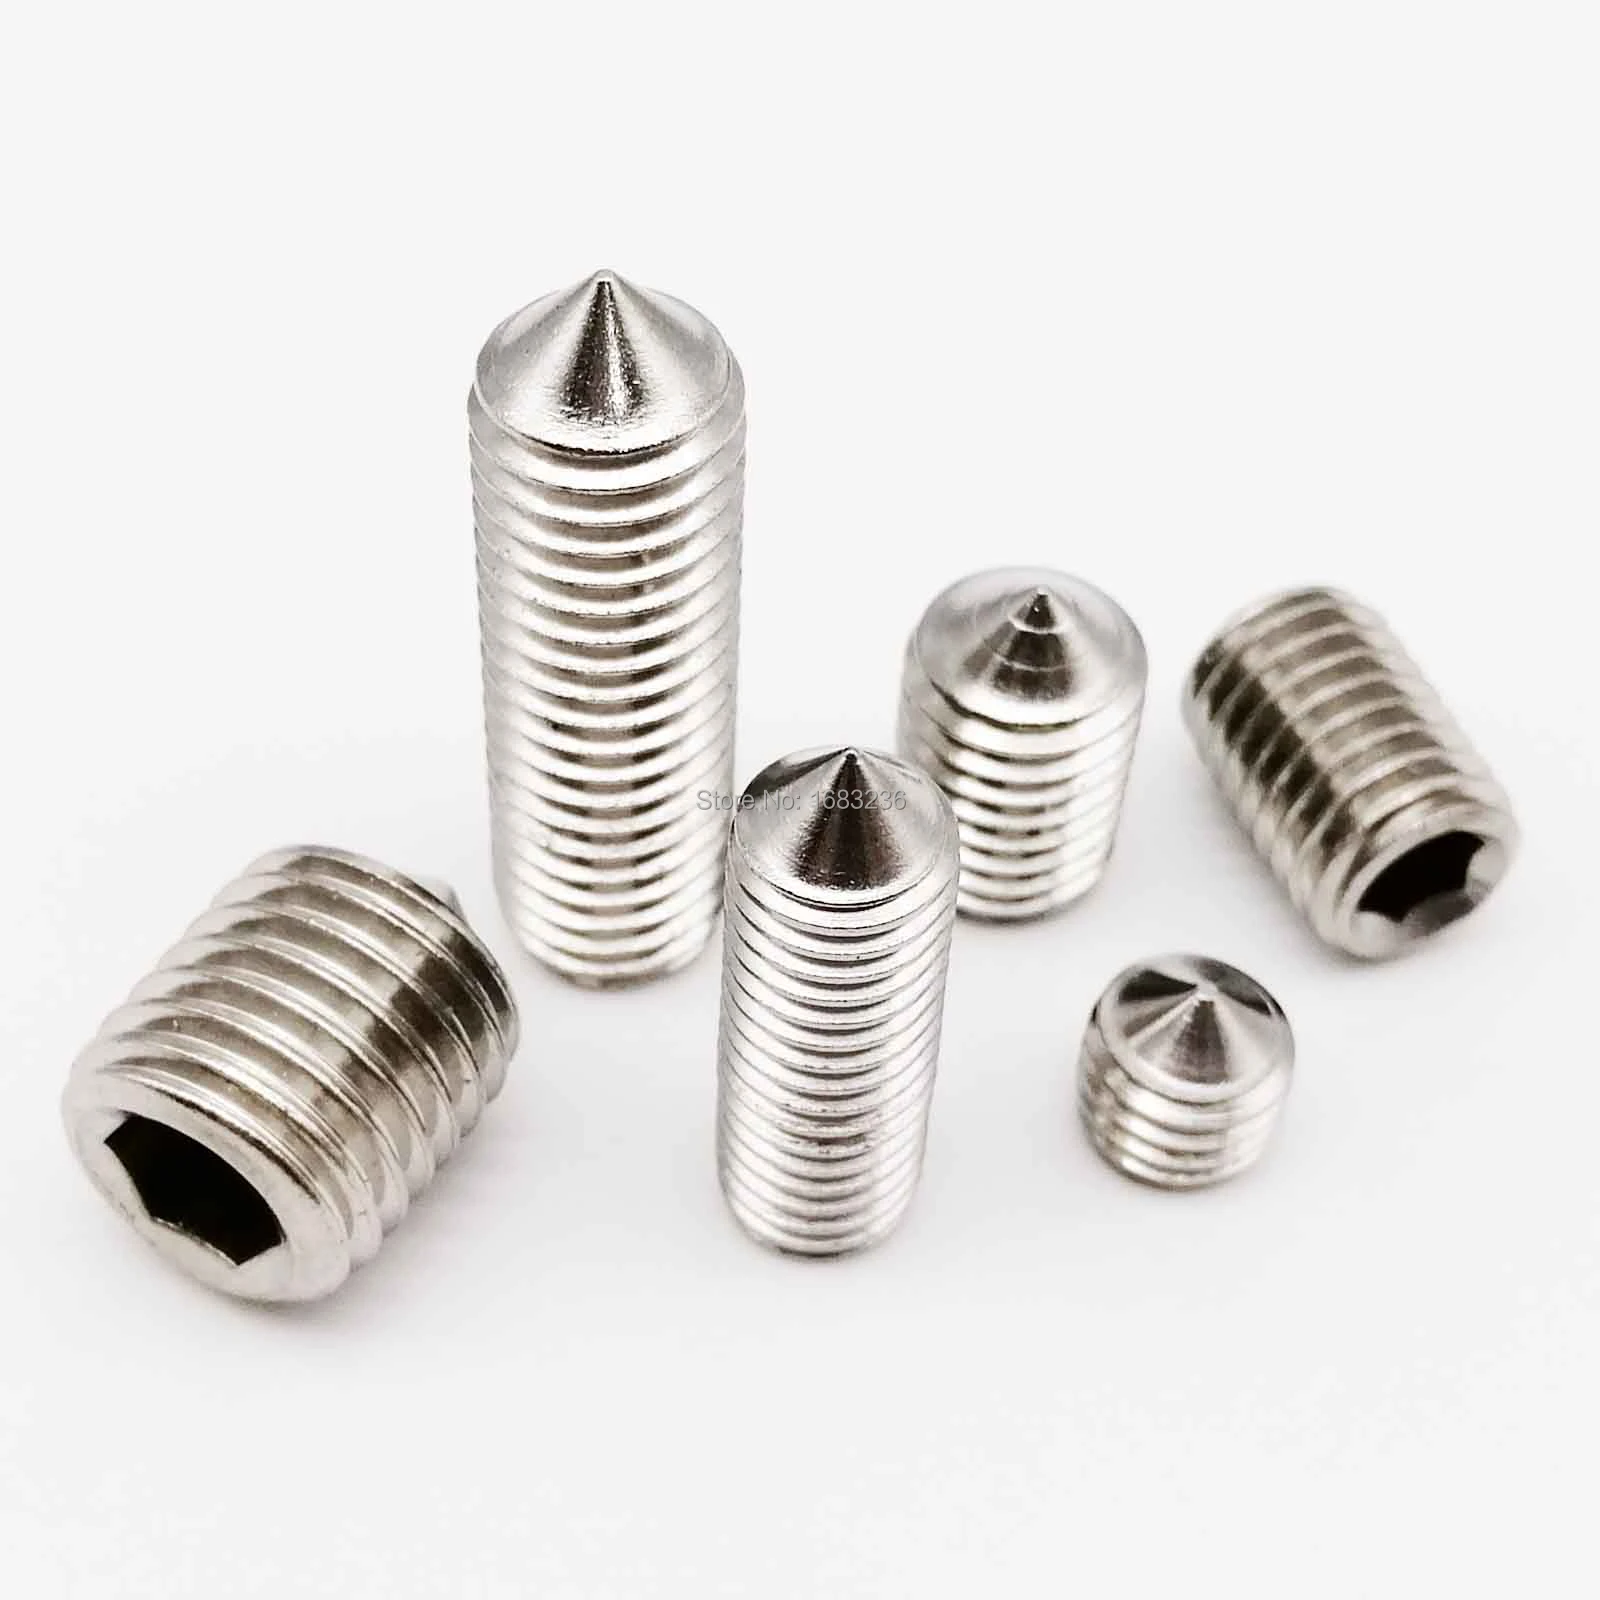 A2 STAINLESS STEEL CONE POINT GRUB SCREWS HEX SOCKET SET SCREW DIN914 8mm 10pcs M8 